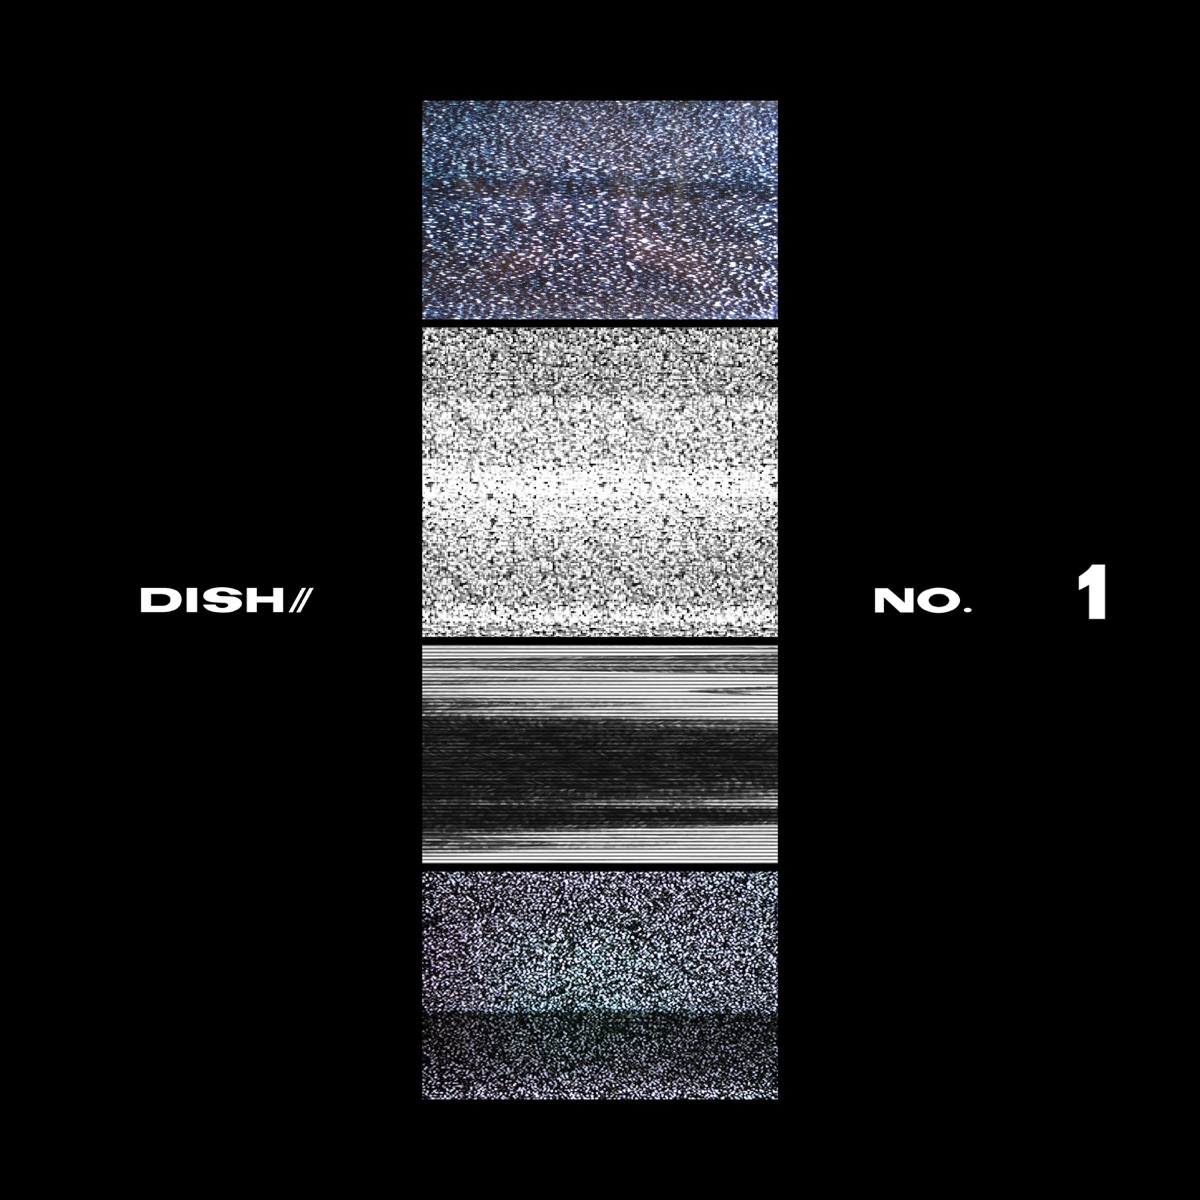 Cover art for『DISH// - No.1』from the release『No.1